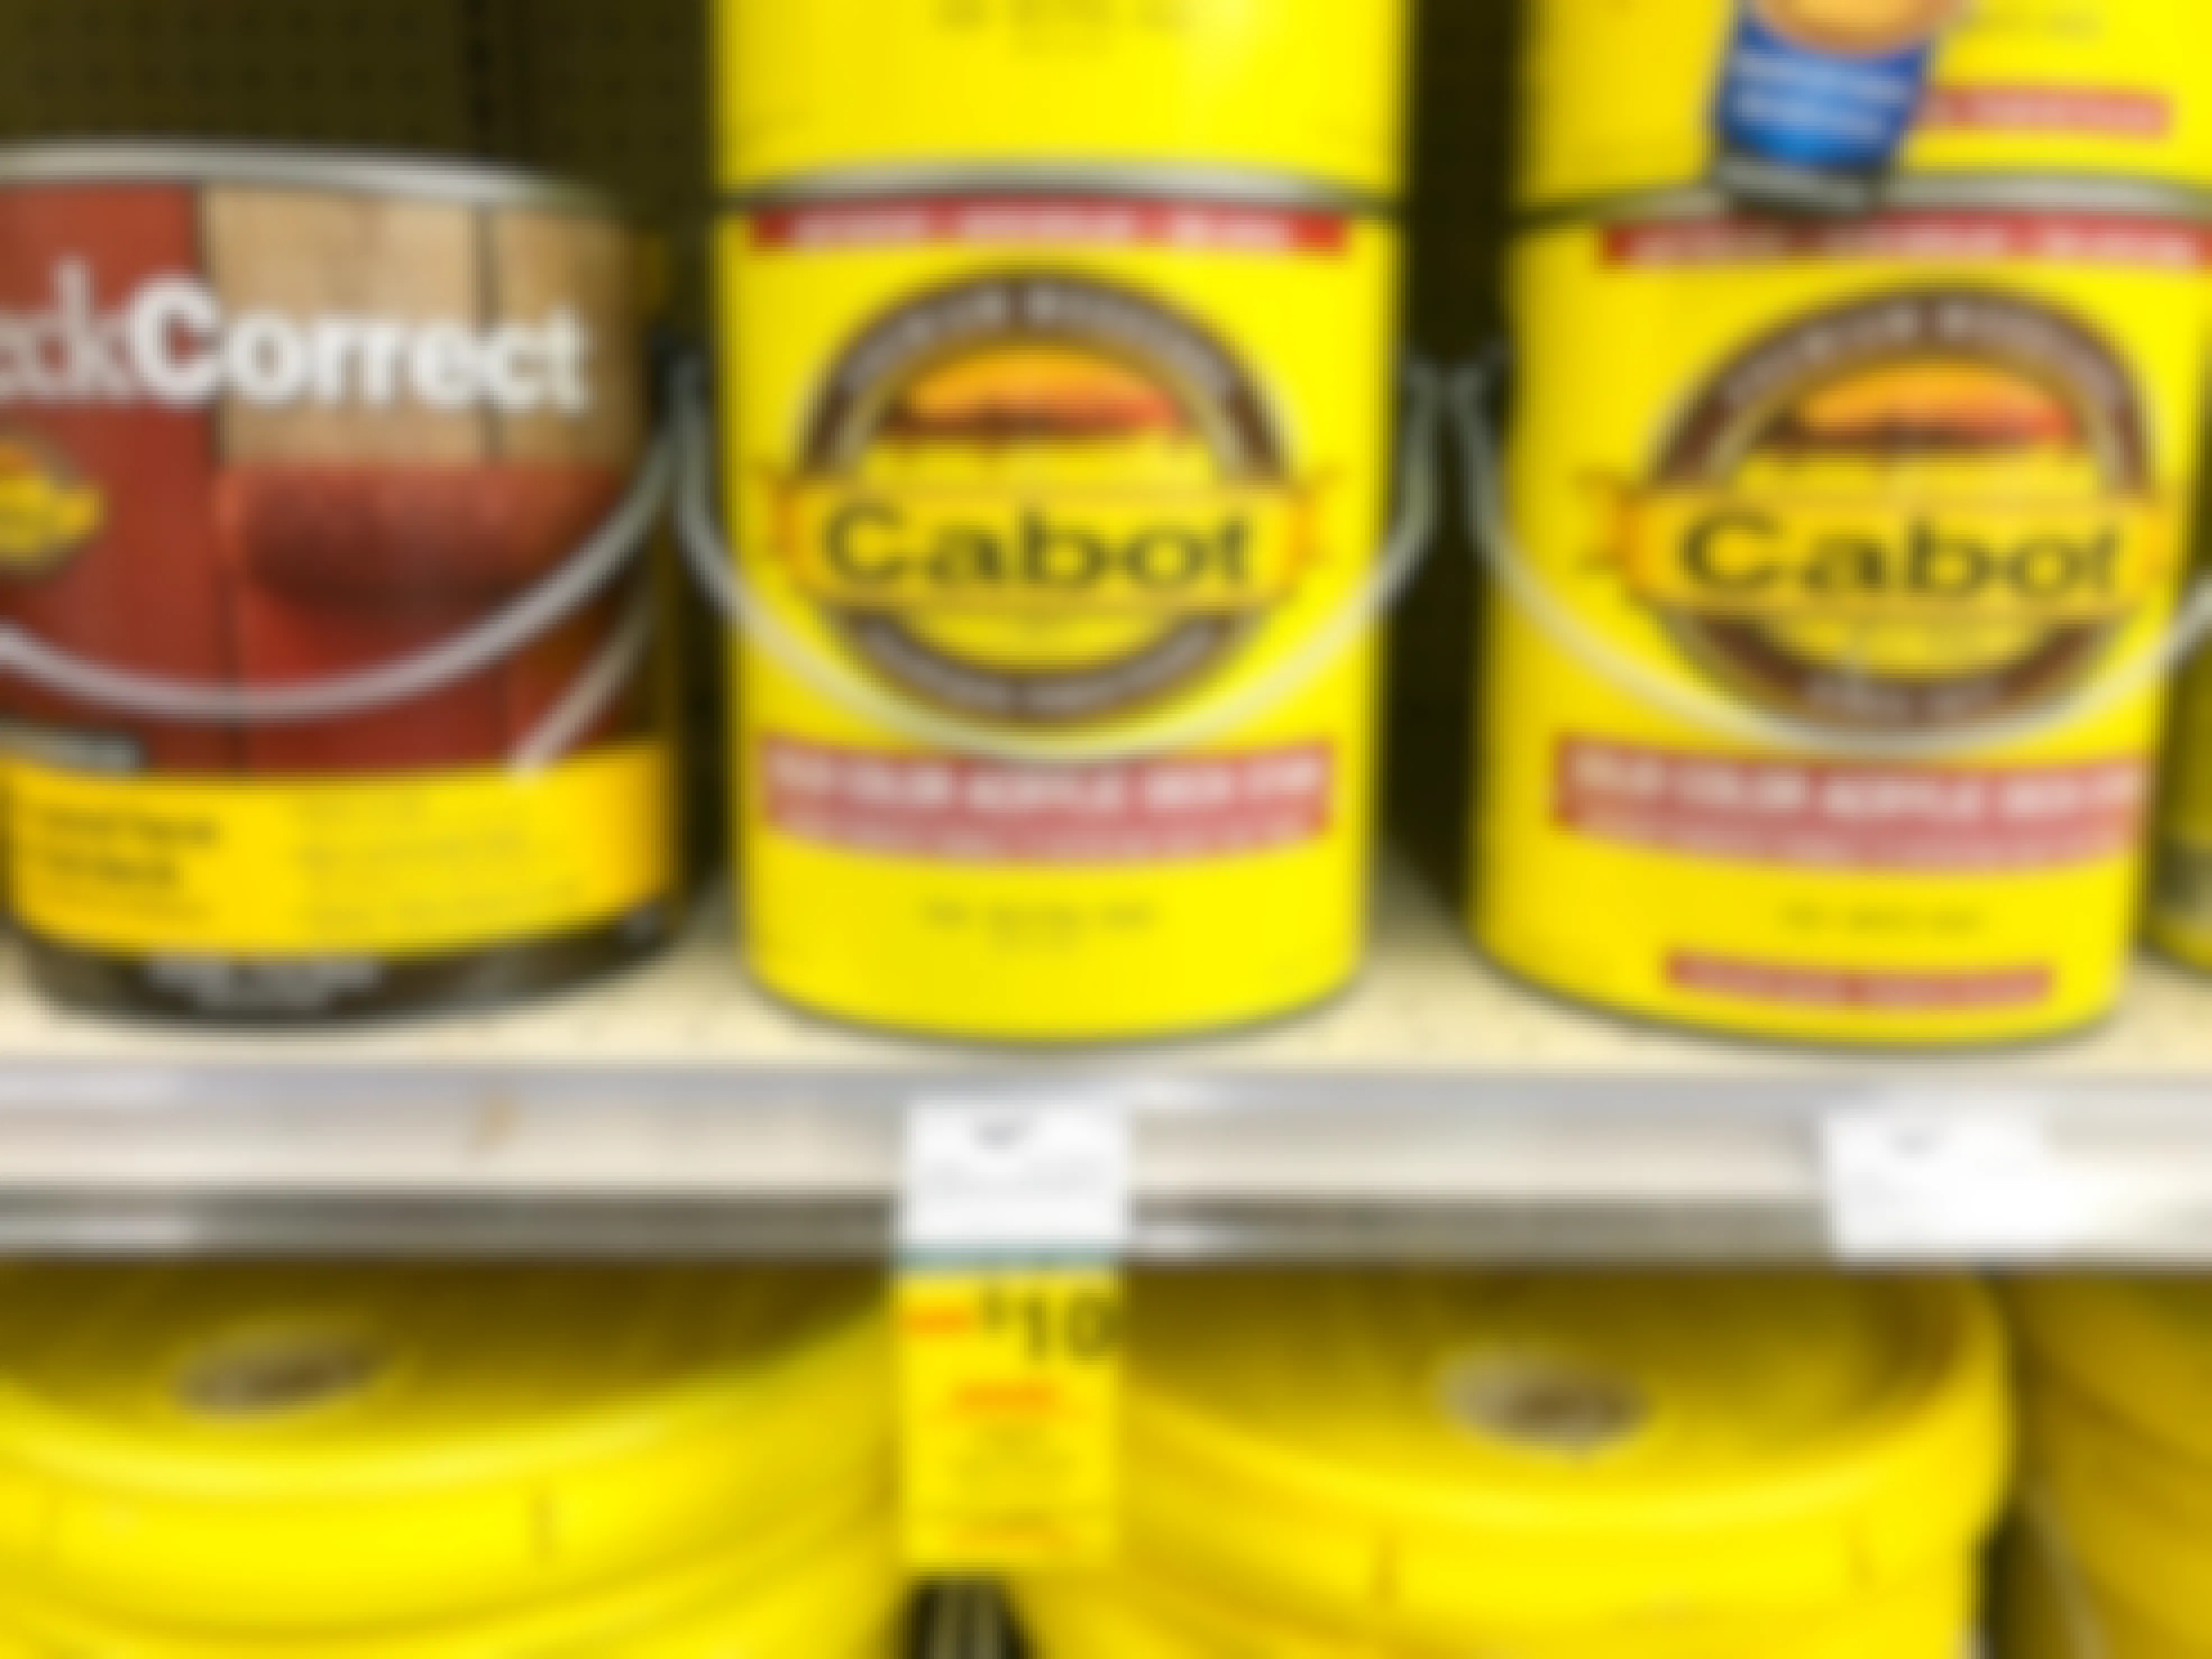 cabot acrylic deck stain gallons on the shelf at ace hardware with a labor day sale sticker